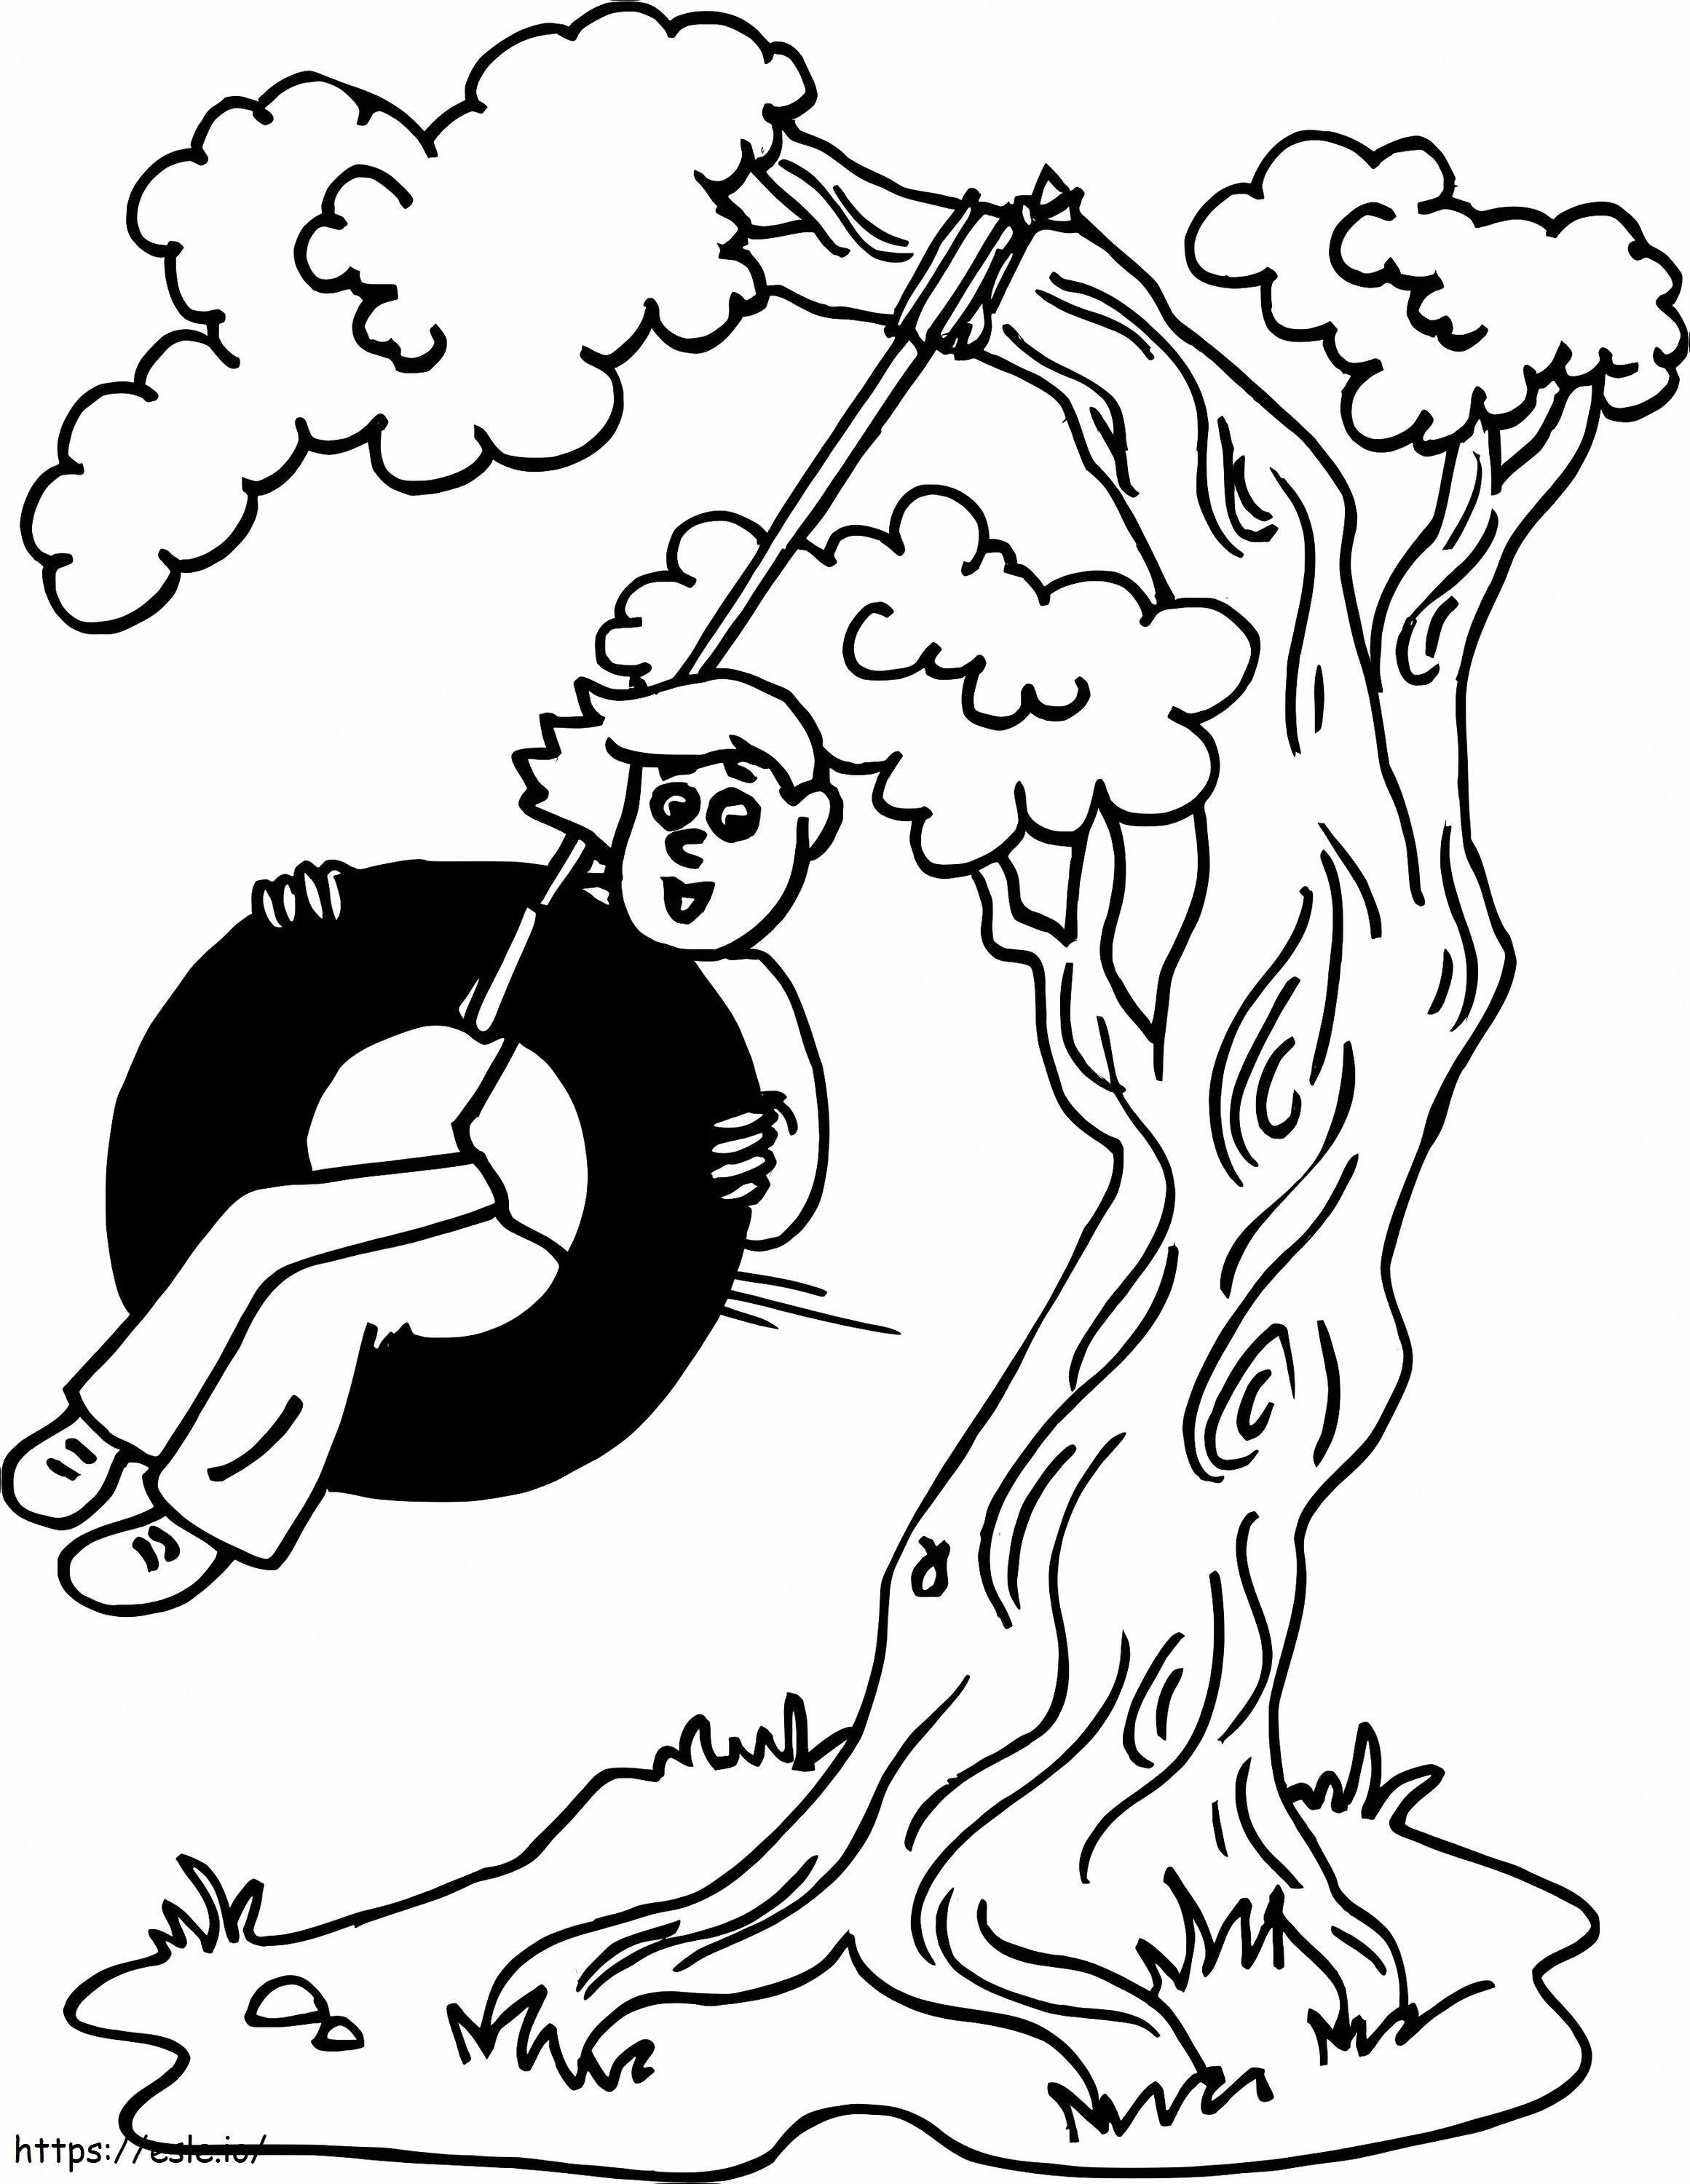 Girl On Tire Swing coloring page